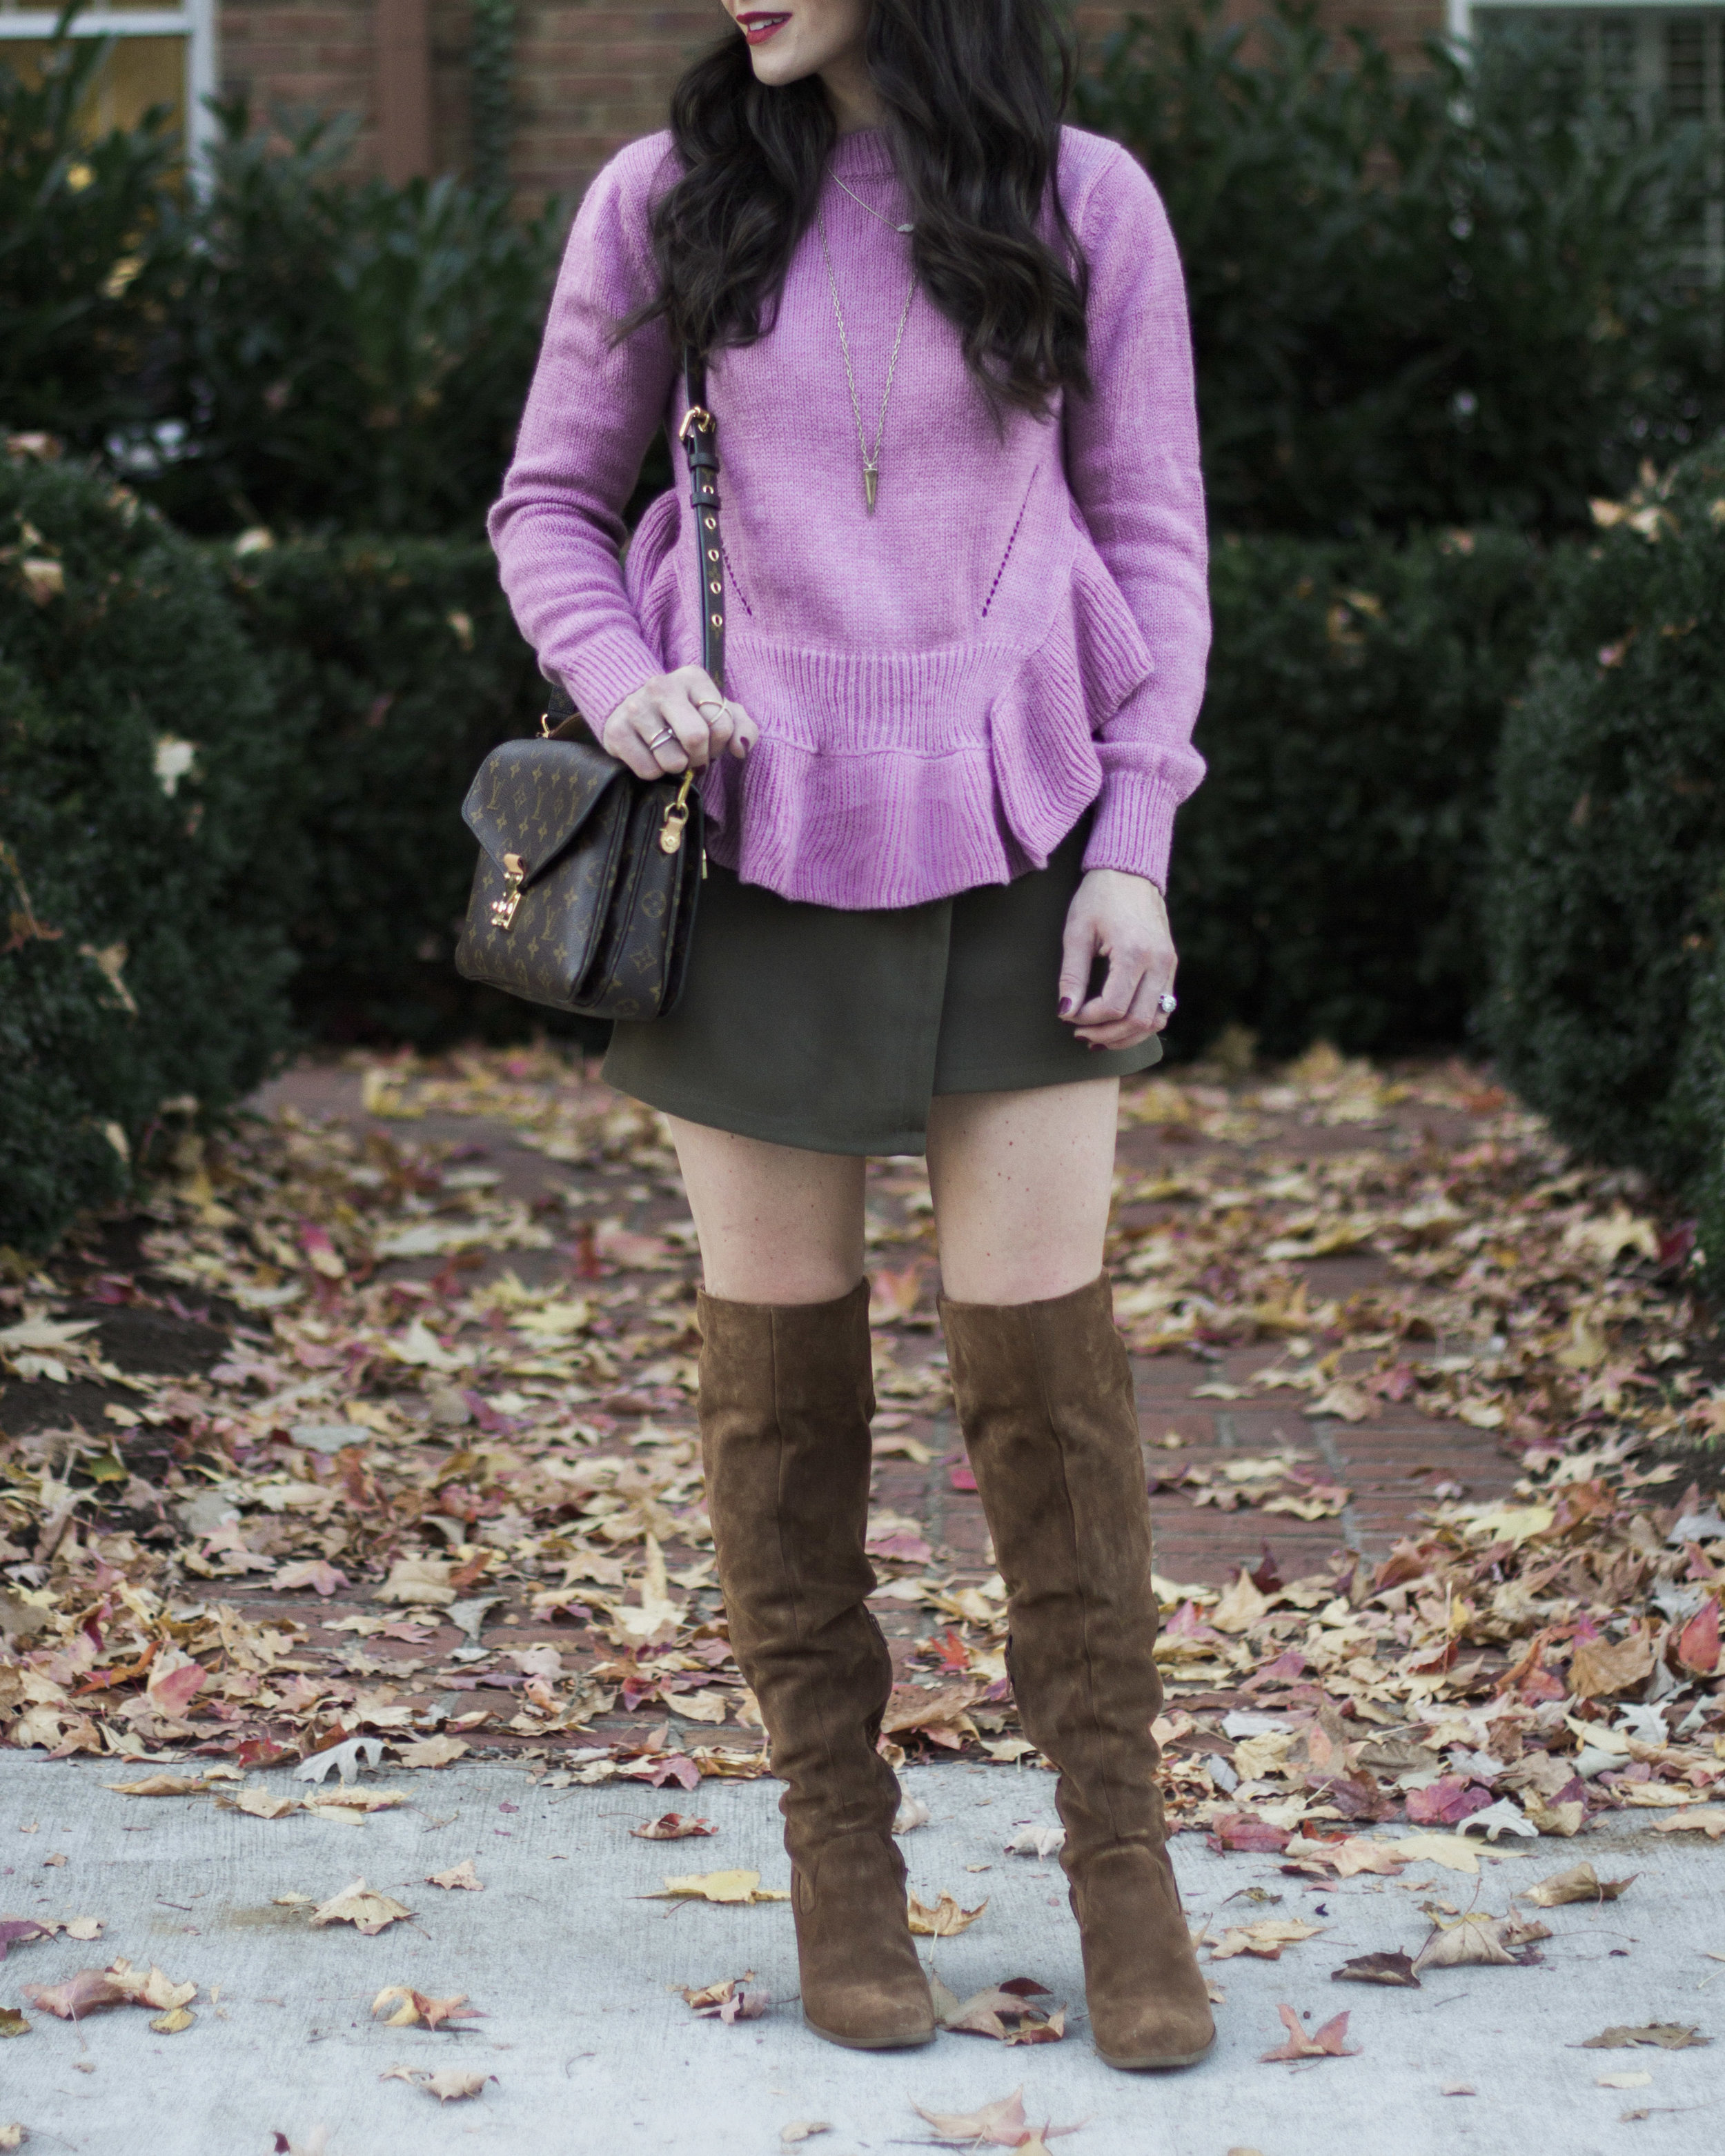 Winter coat over a mini dress. Louis Vuitton Speedy 35. Tall boots. Great  Winter outfit!! Check o…